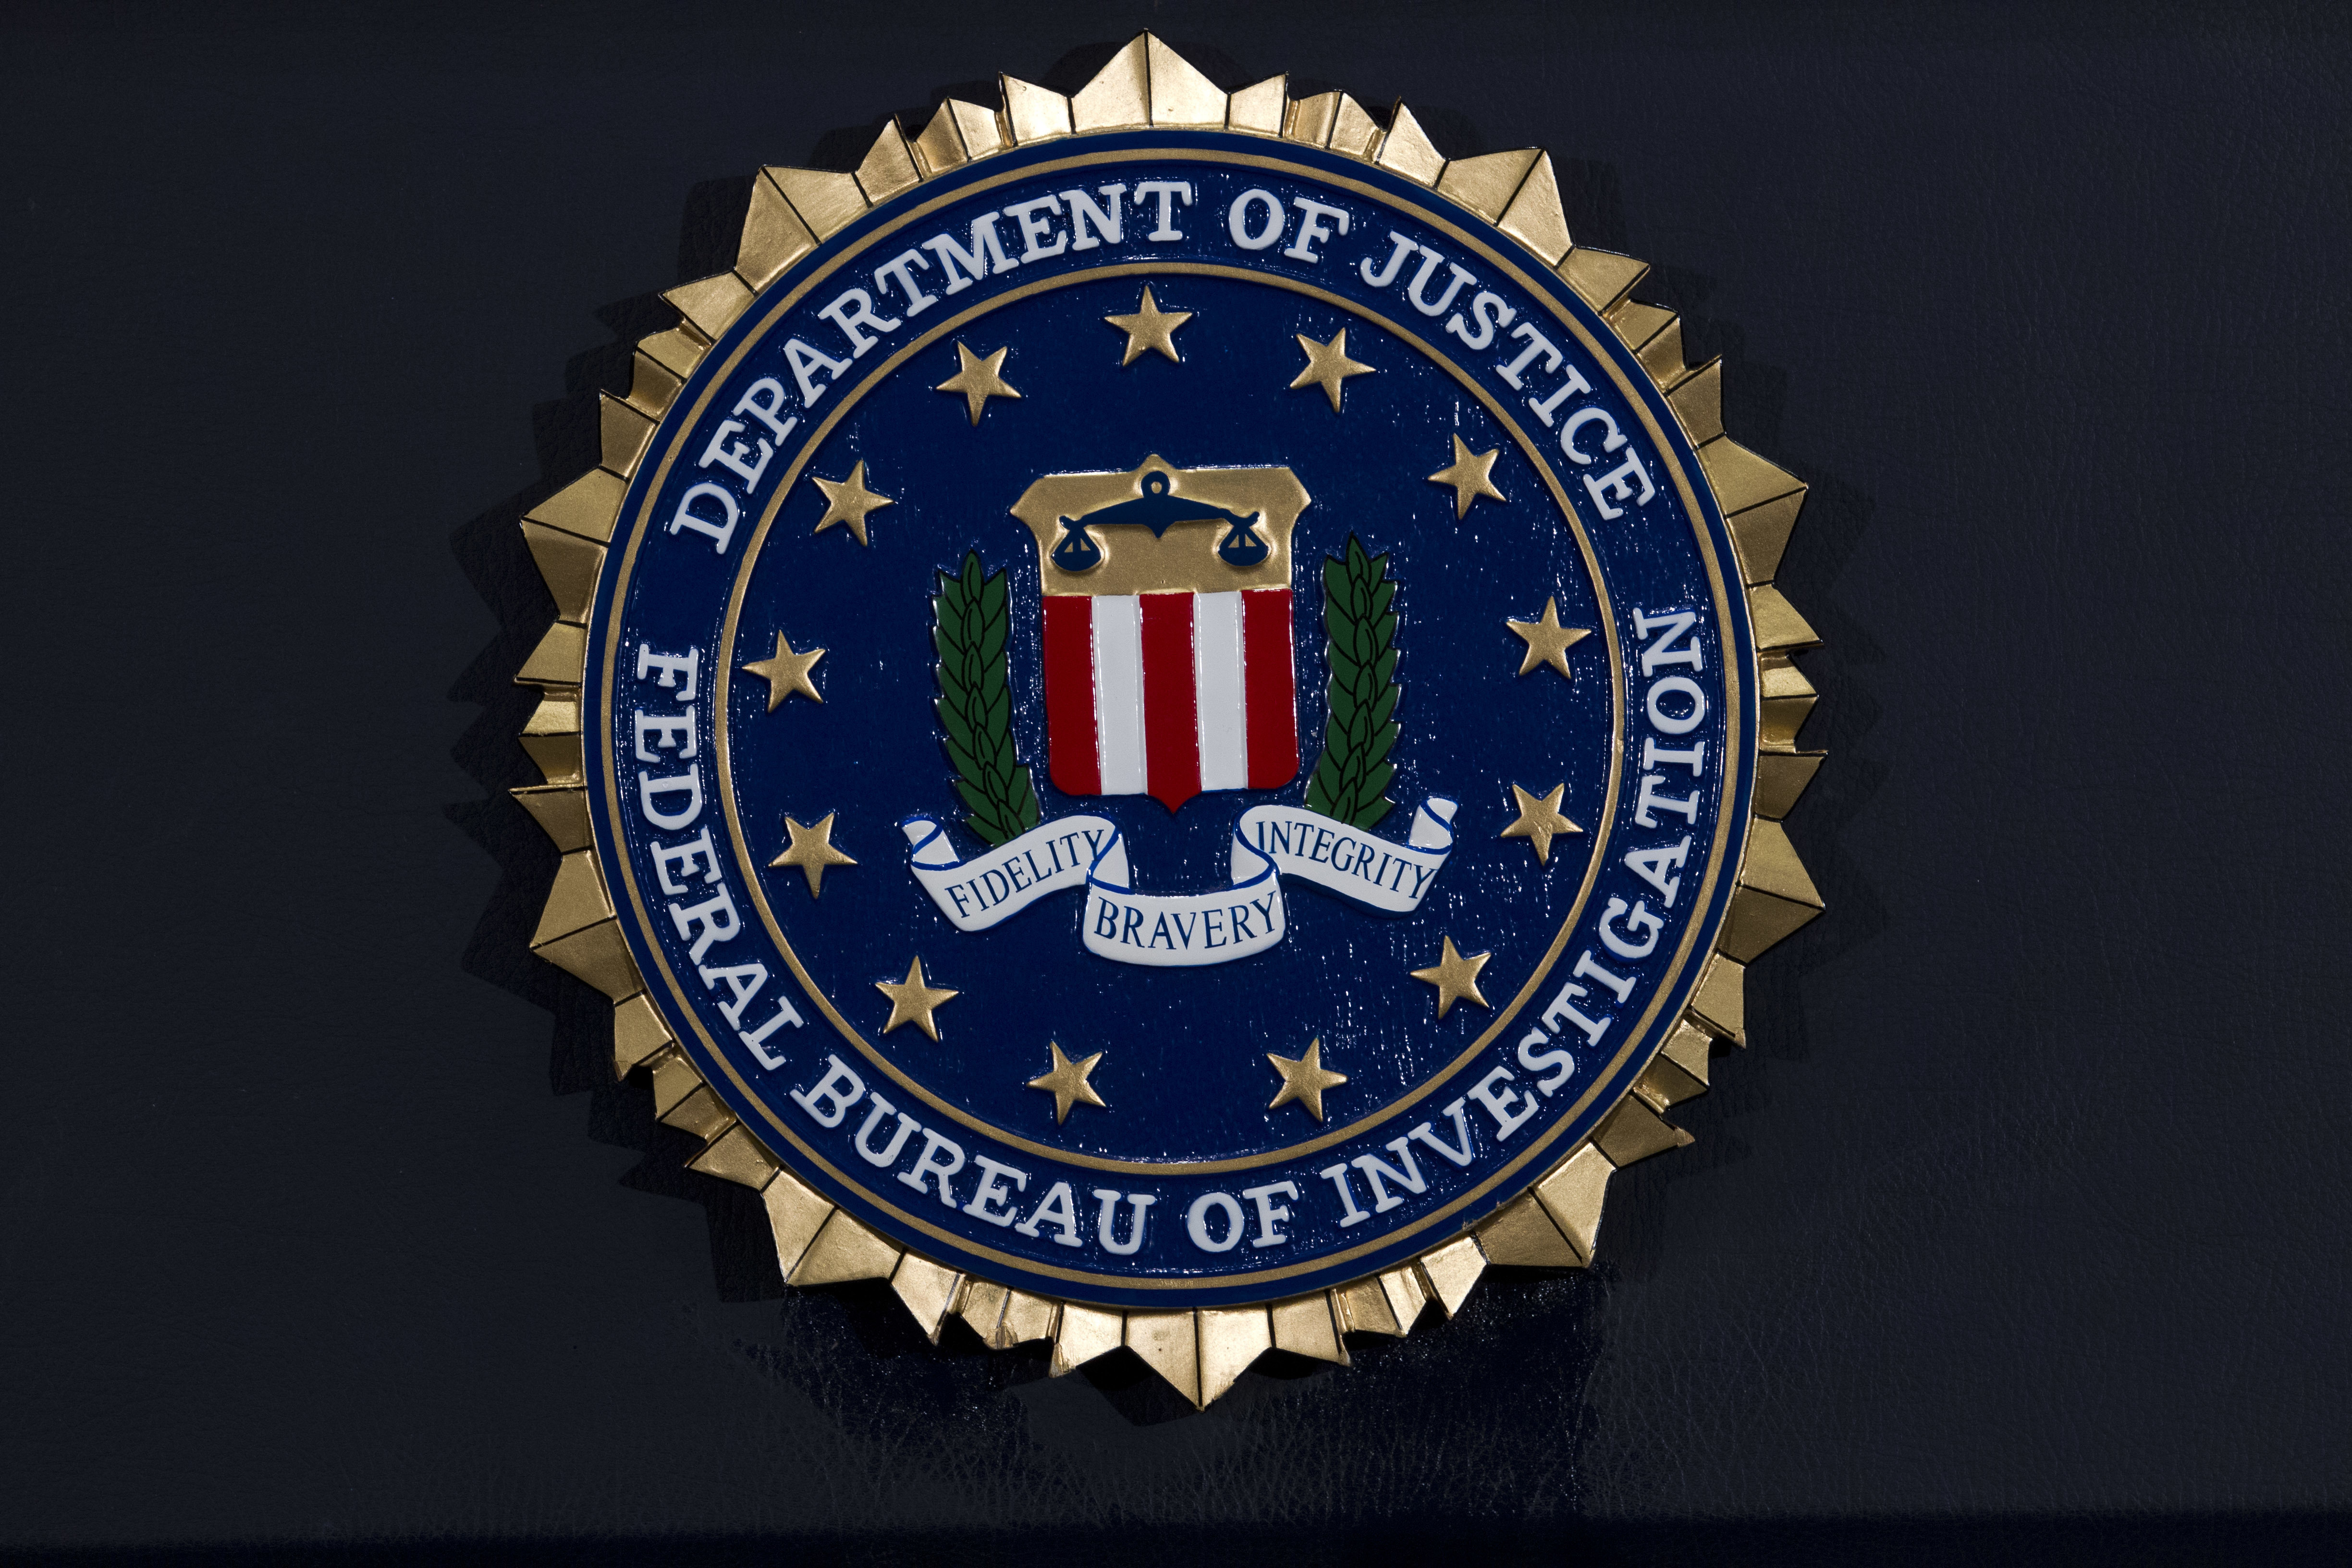 FILE - This Thursday, June 14, 2018, file photo, shows the FBI seal at a news conference at FBI headquarters in Washington. In an alert Wednesday, Oct. 28, 2020, the FBI and other federal agencies warned that cybercriminals are unleashing a wave of data-scrambling extortion attempts against the U.S. healthcare system that could lock up their information systems just as nationwide cases of COVID-19 are spiking. Photo: AP